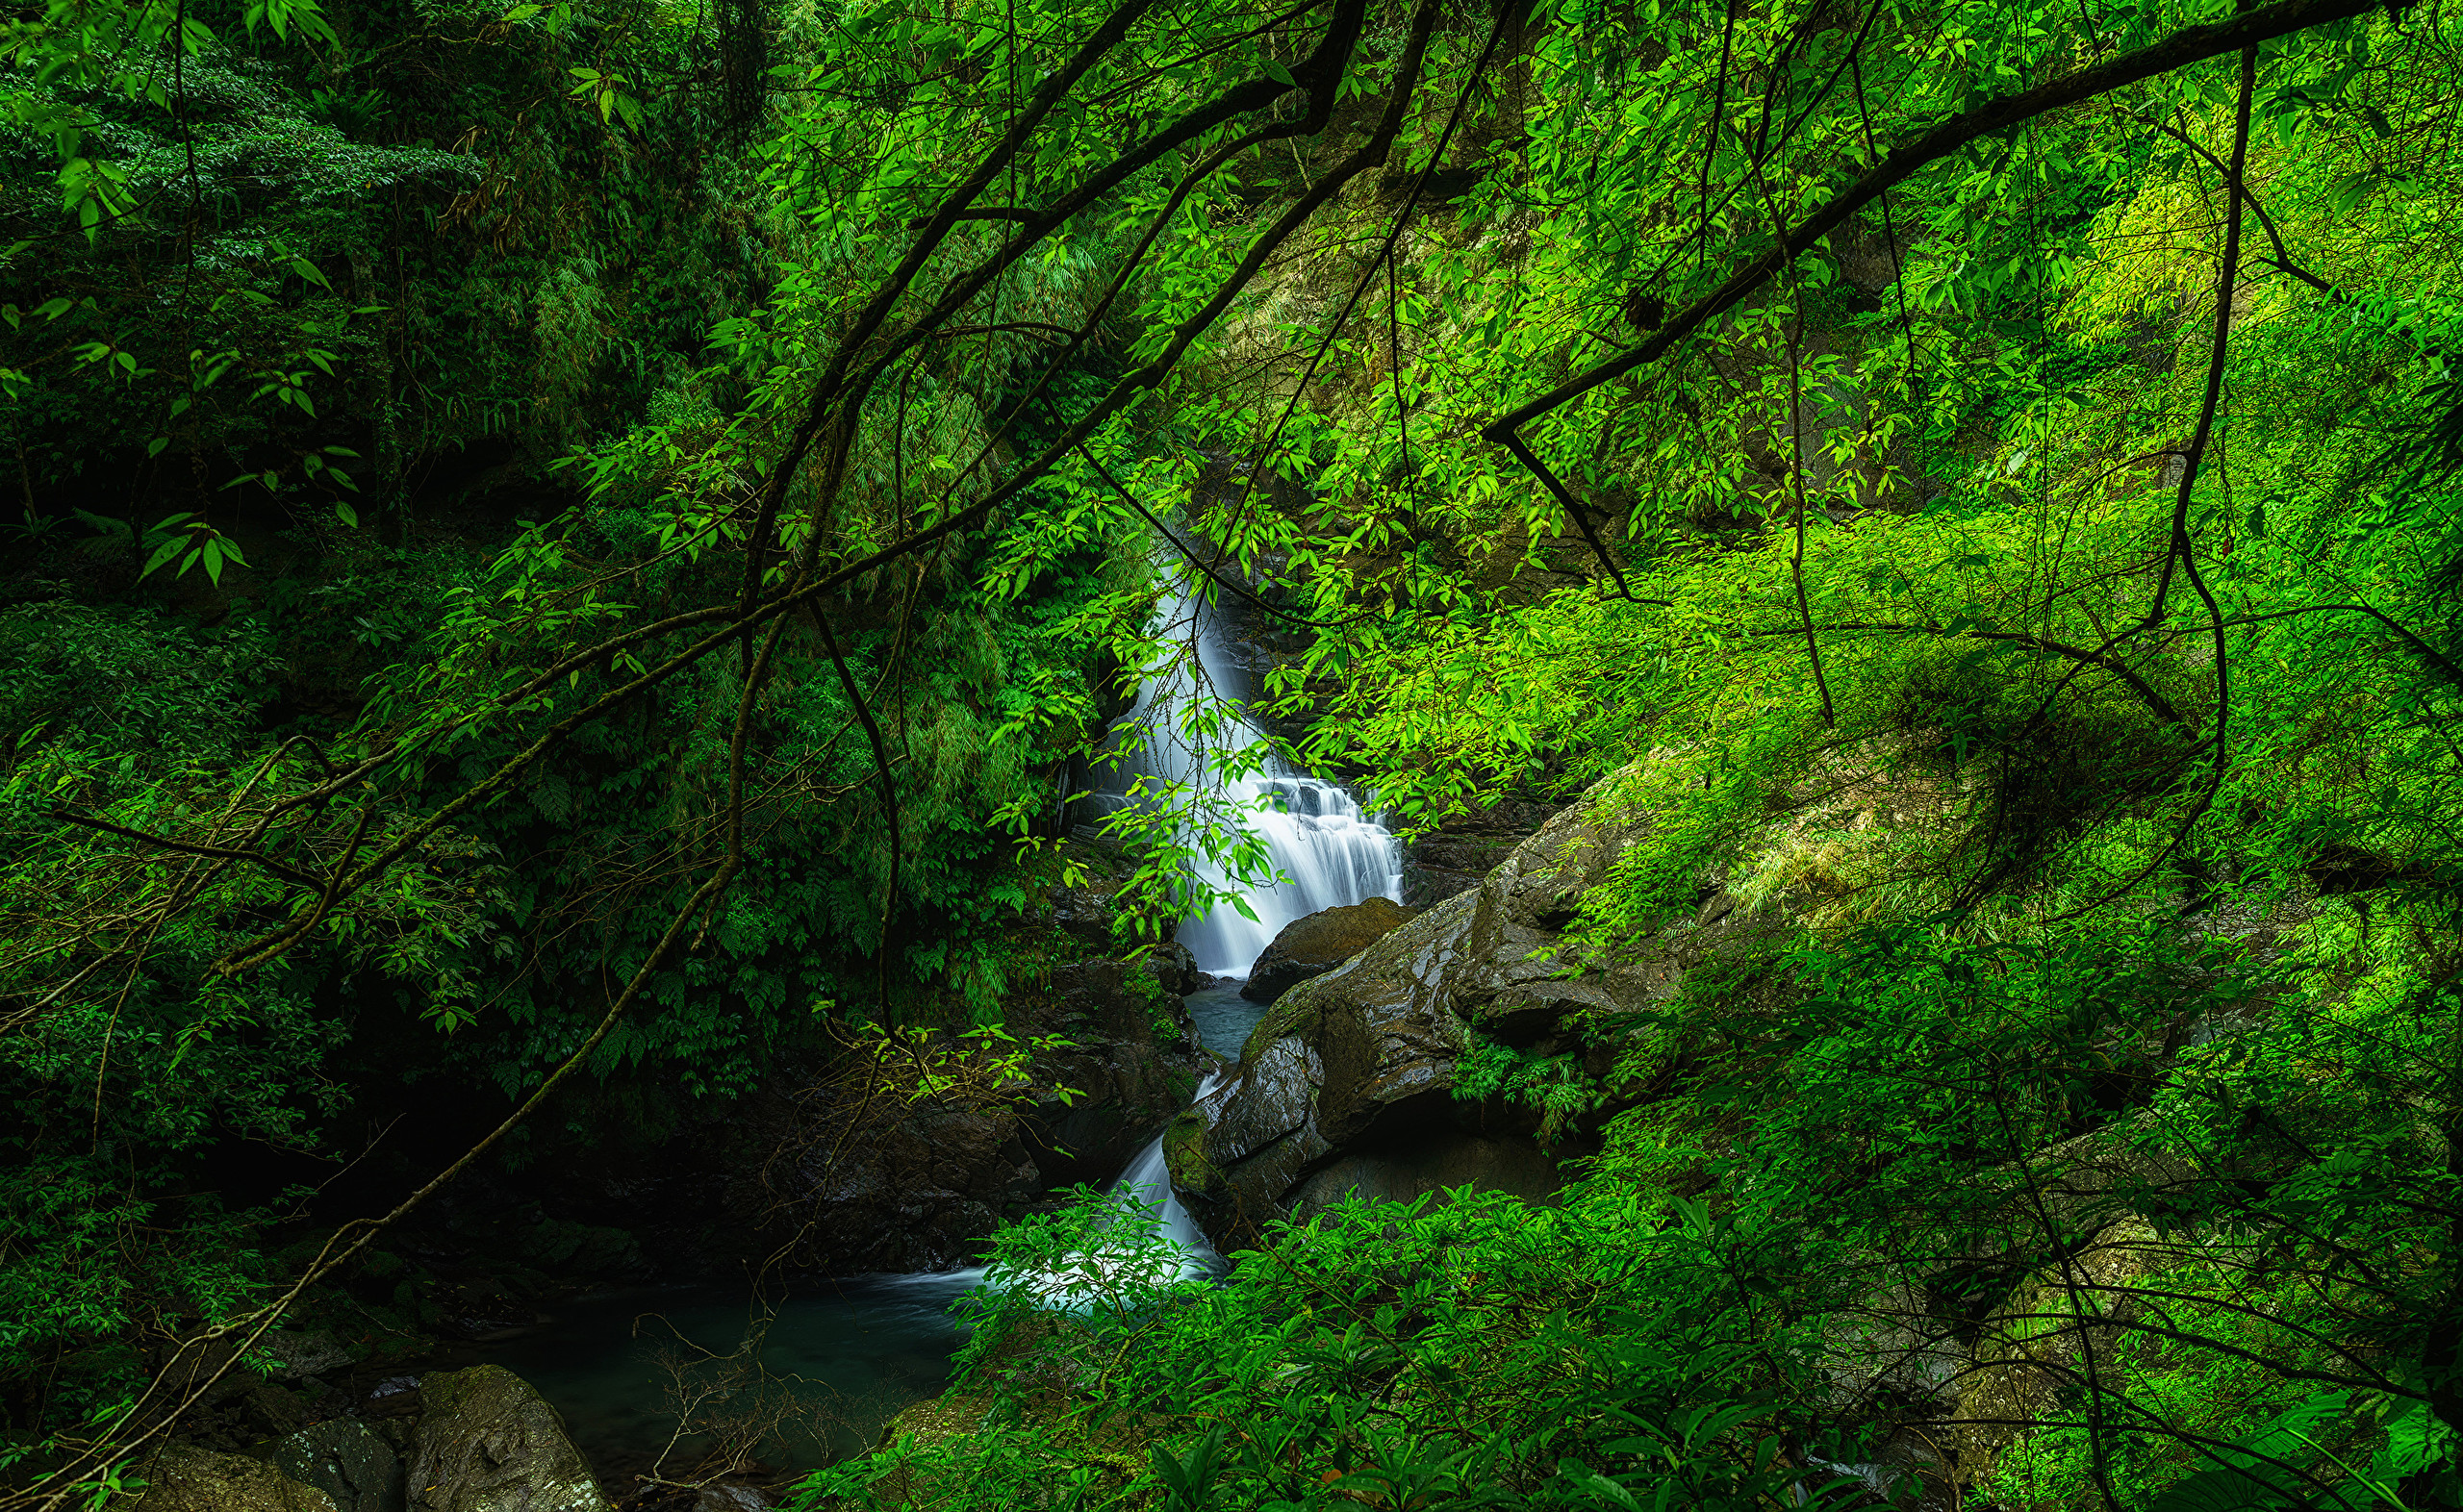 General 2560x1572 nature landscape forest Taiwan Manyueyuan Forest waterfall rocks branch leaves